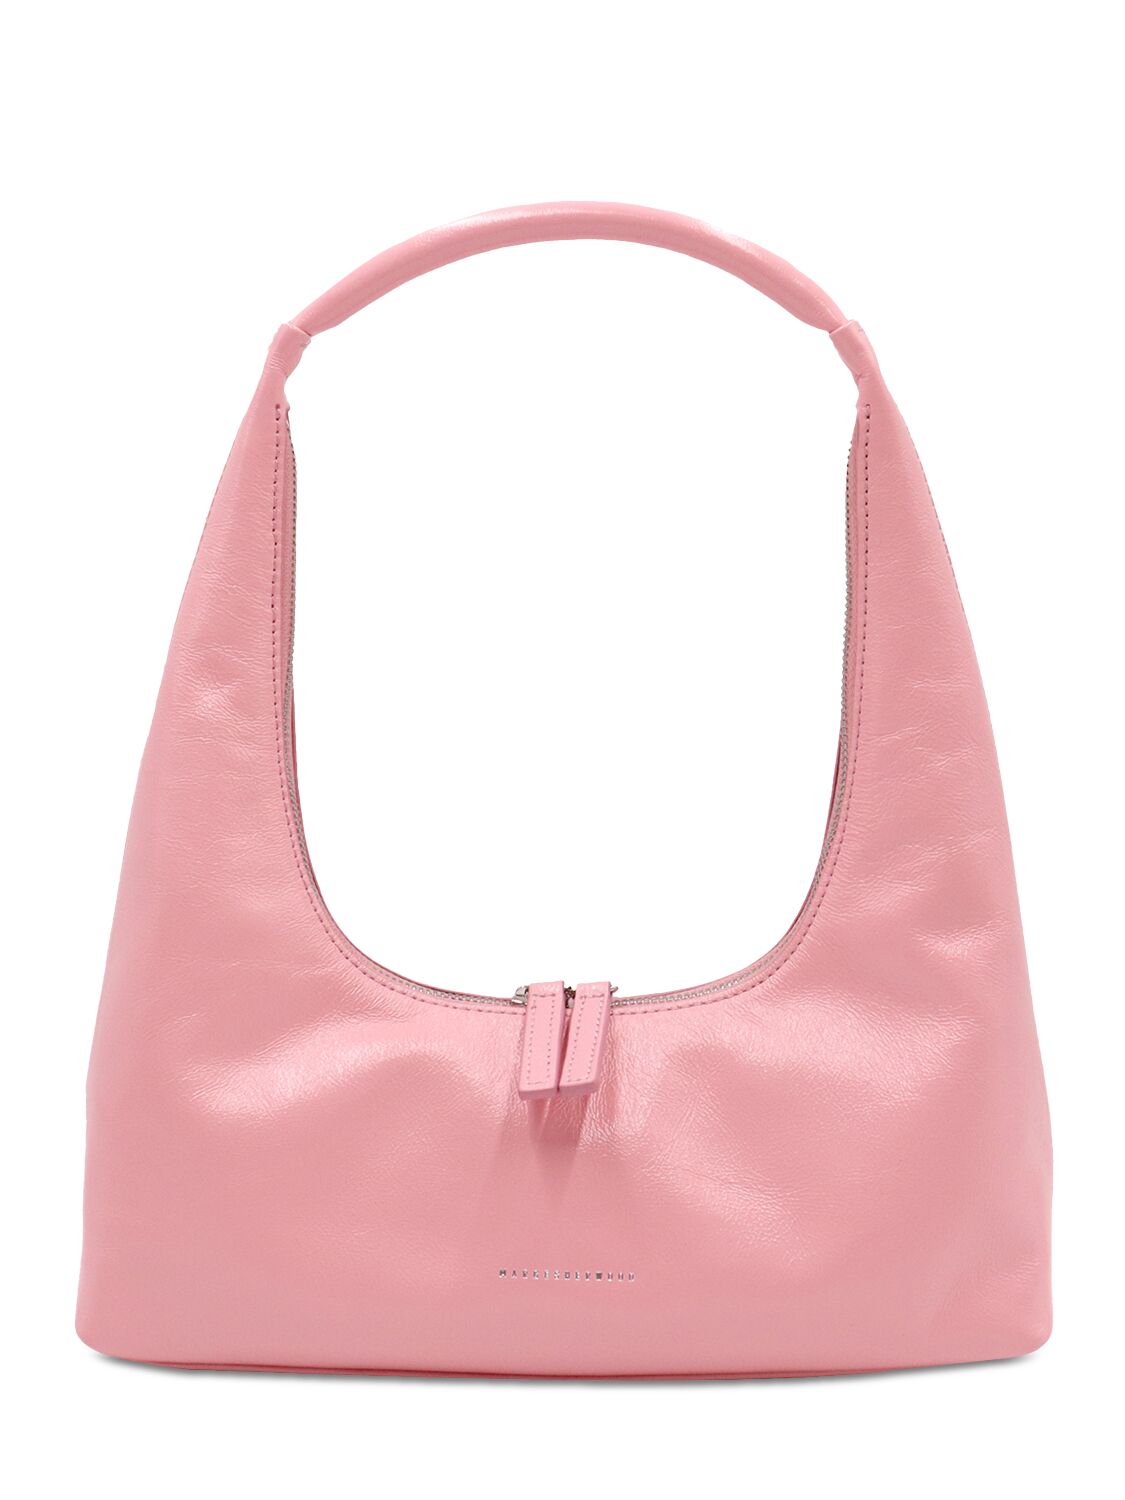 Marge Sherwood Hobo Leather Shoulder Bag In Candy Pink Glossy